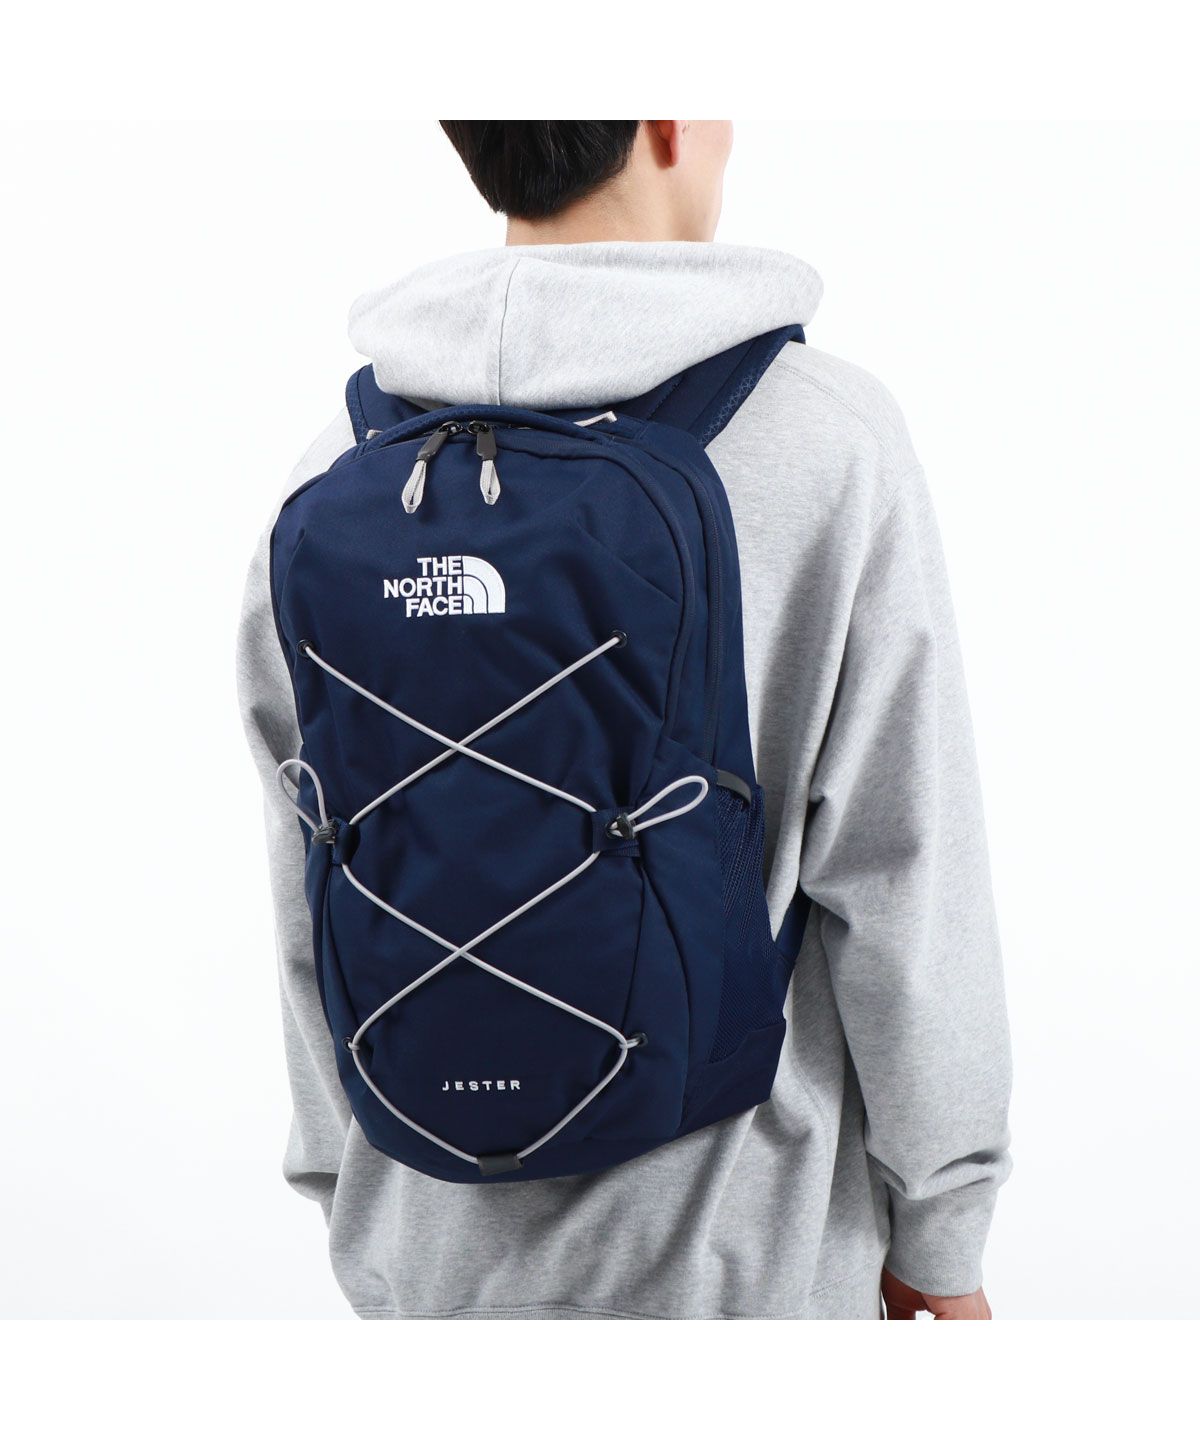 THE NORTH FACE JESTER バックパック 26L